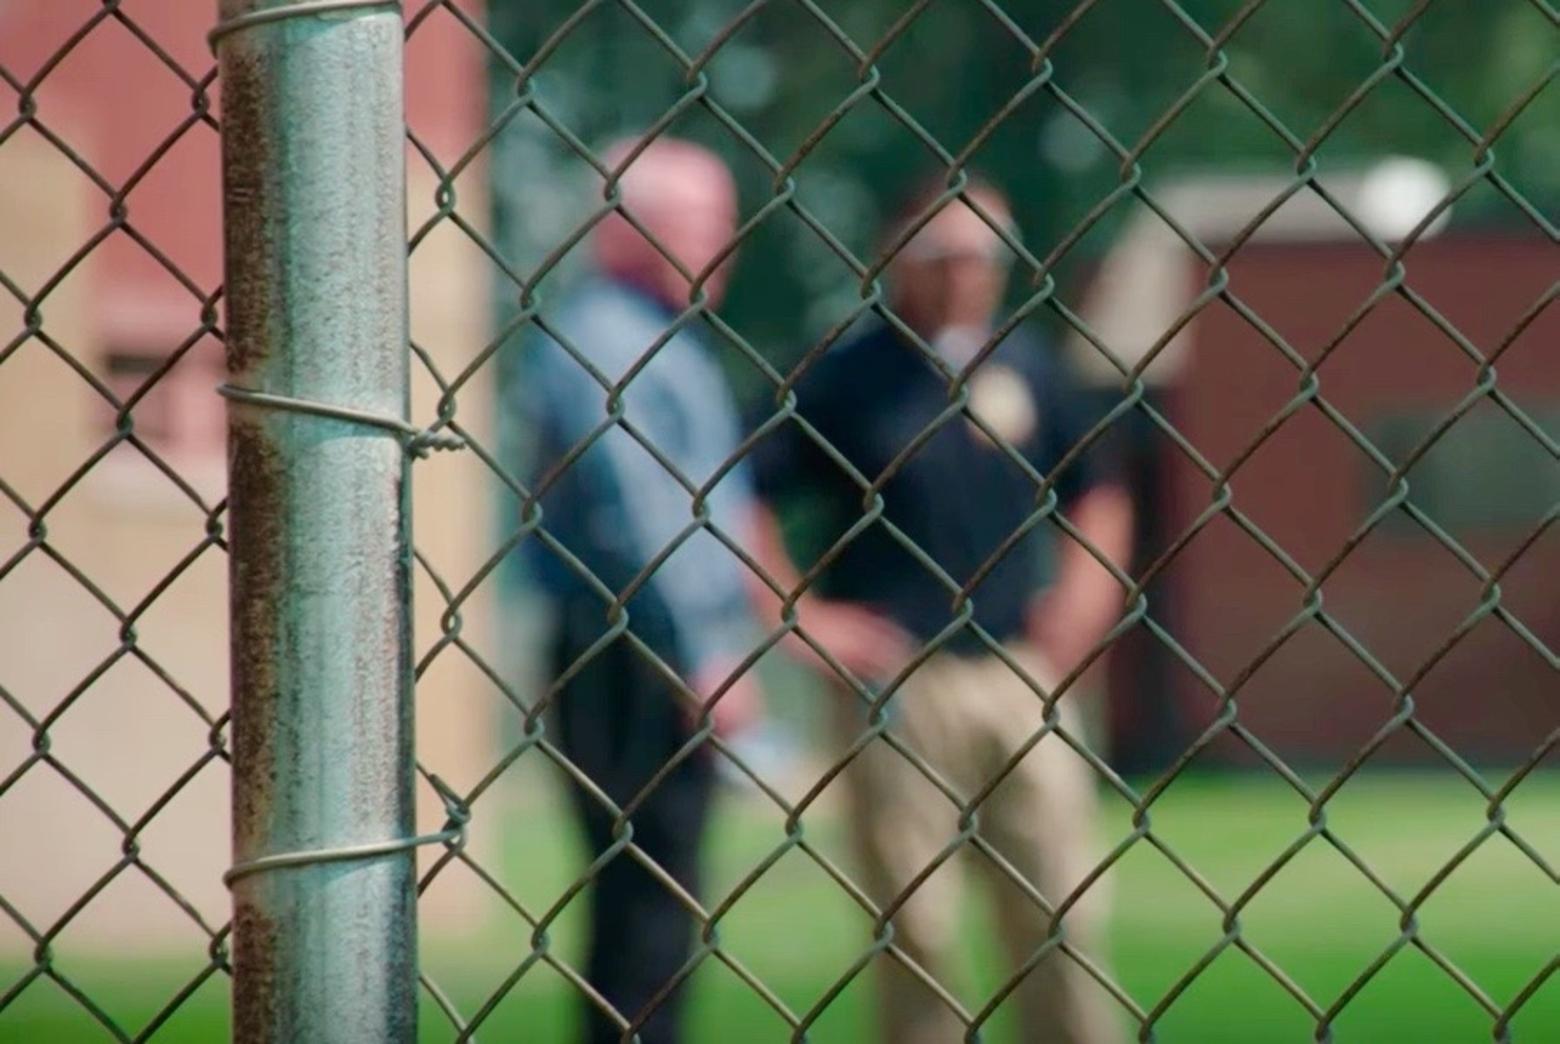 Corrections officials chat behind the fence at Pine Hills. All photos courtesy Montana State Fund